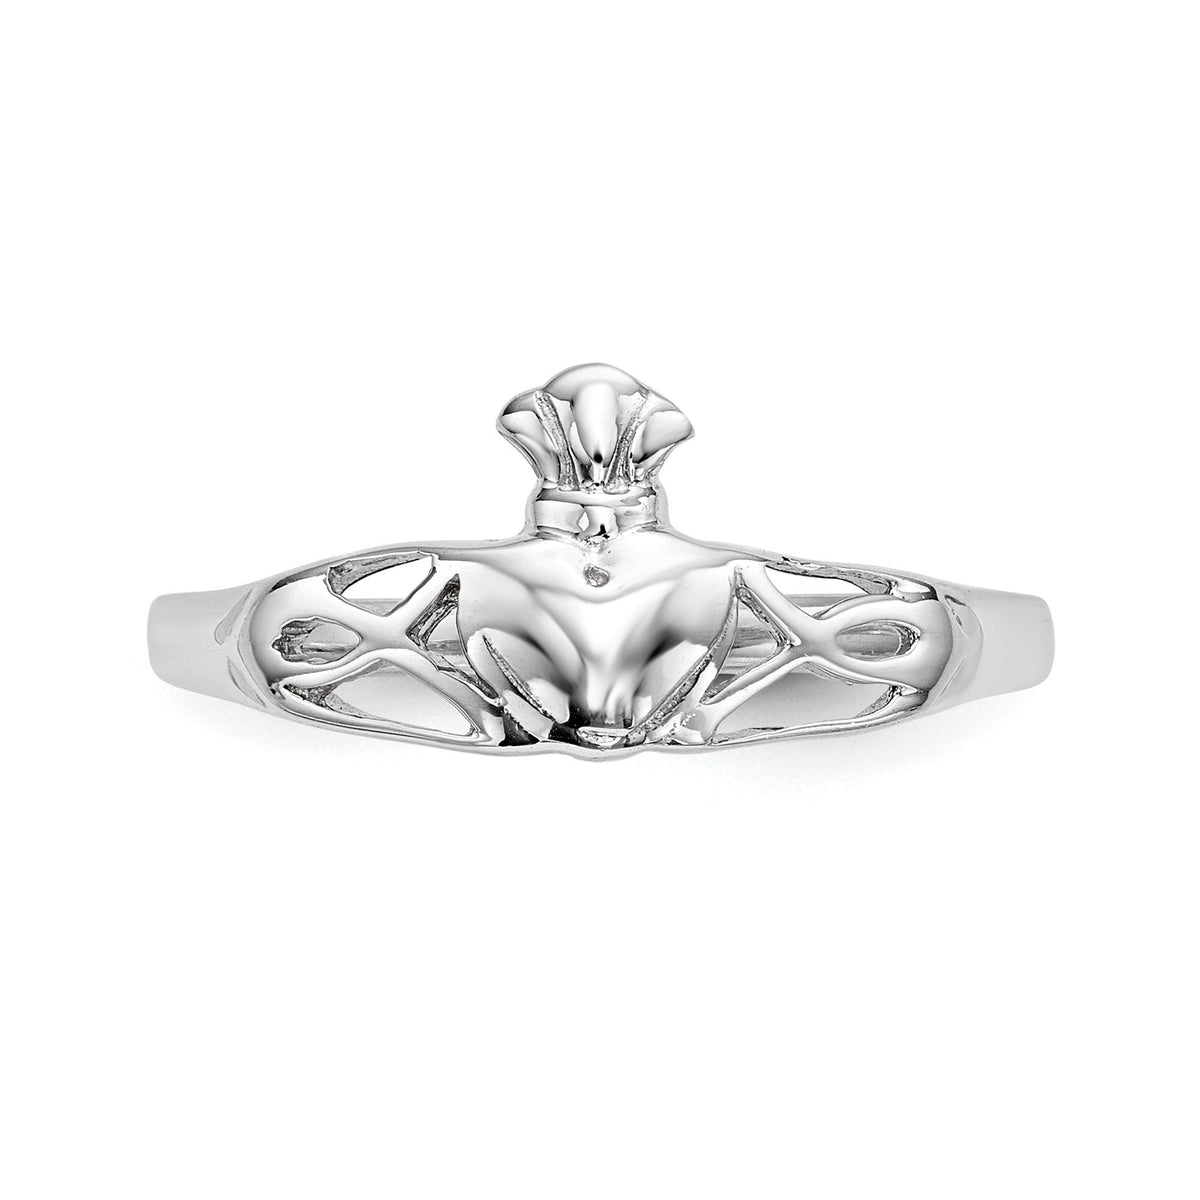 Womens Claddagh Ring Celtic Band available in Sterling Silver Claddagh Ring Sizes 6-8 -Gift Box Included